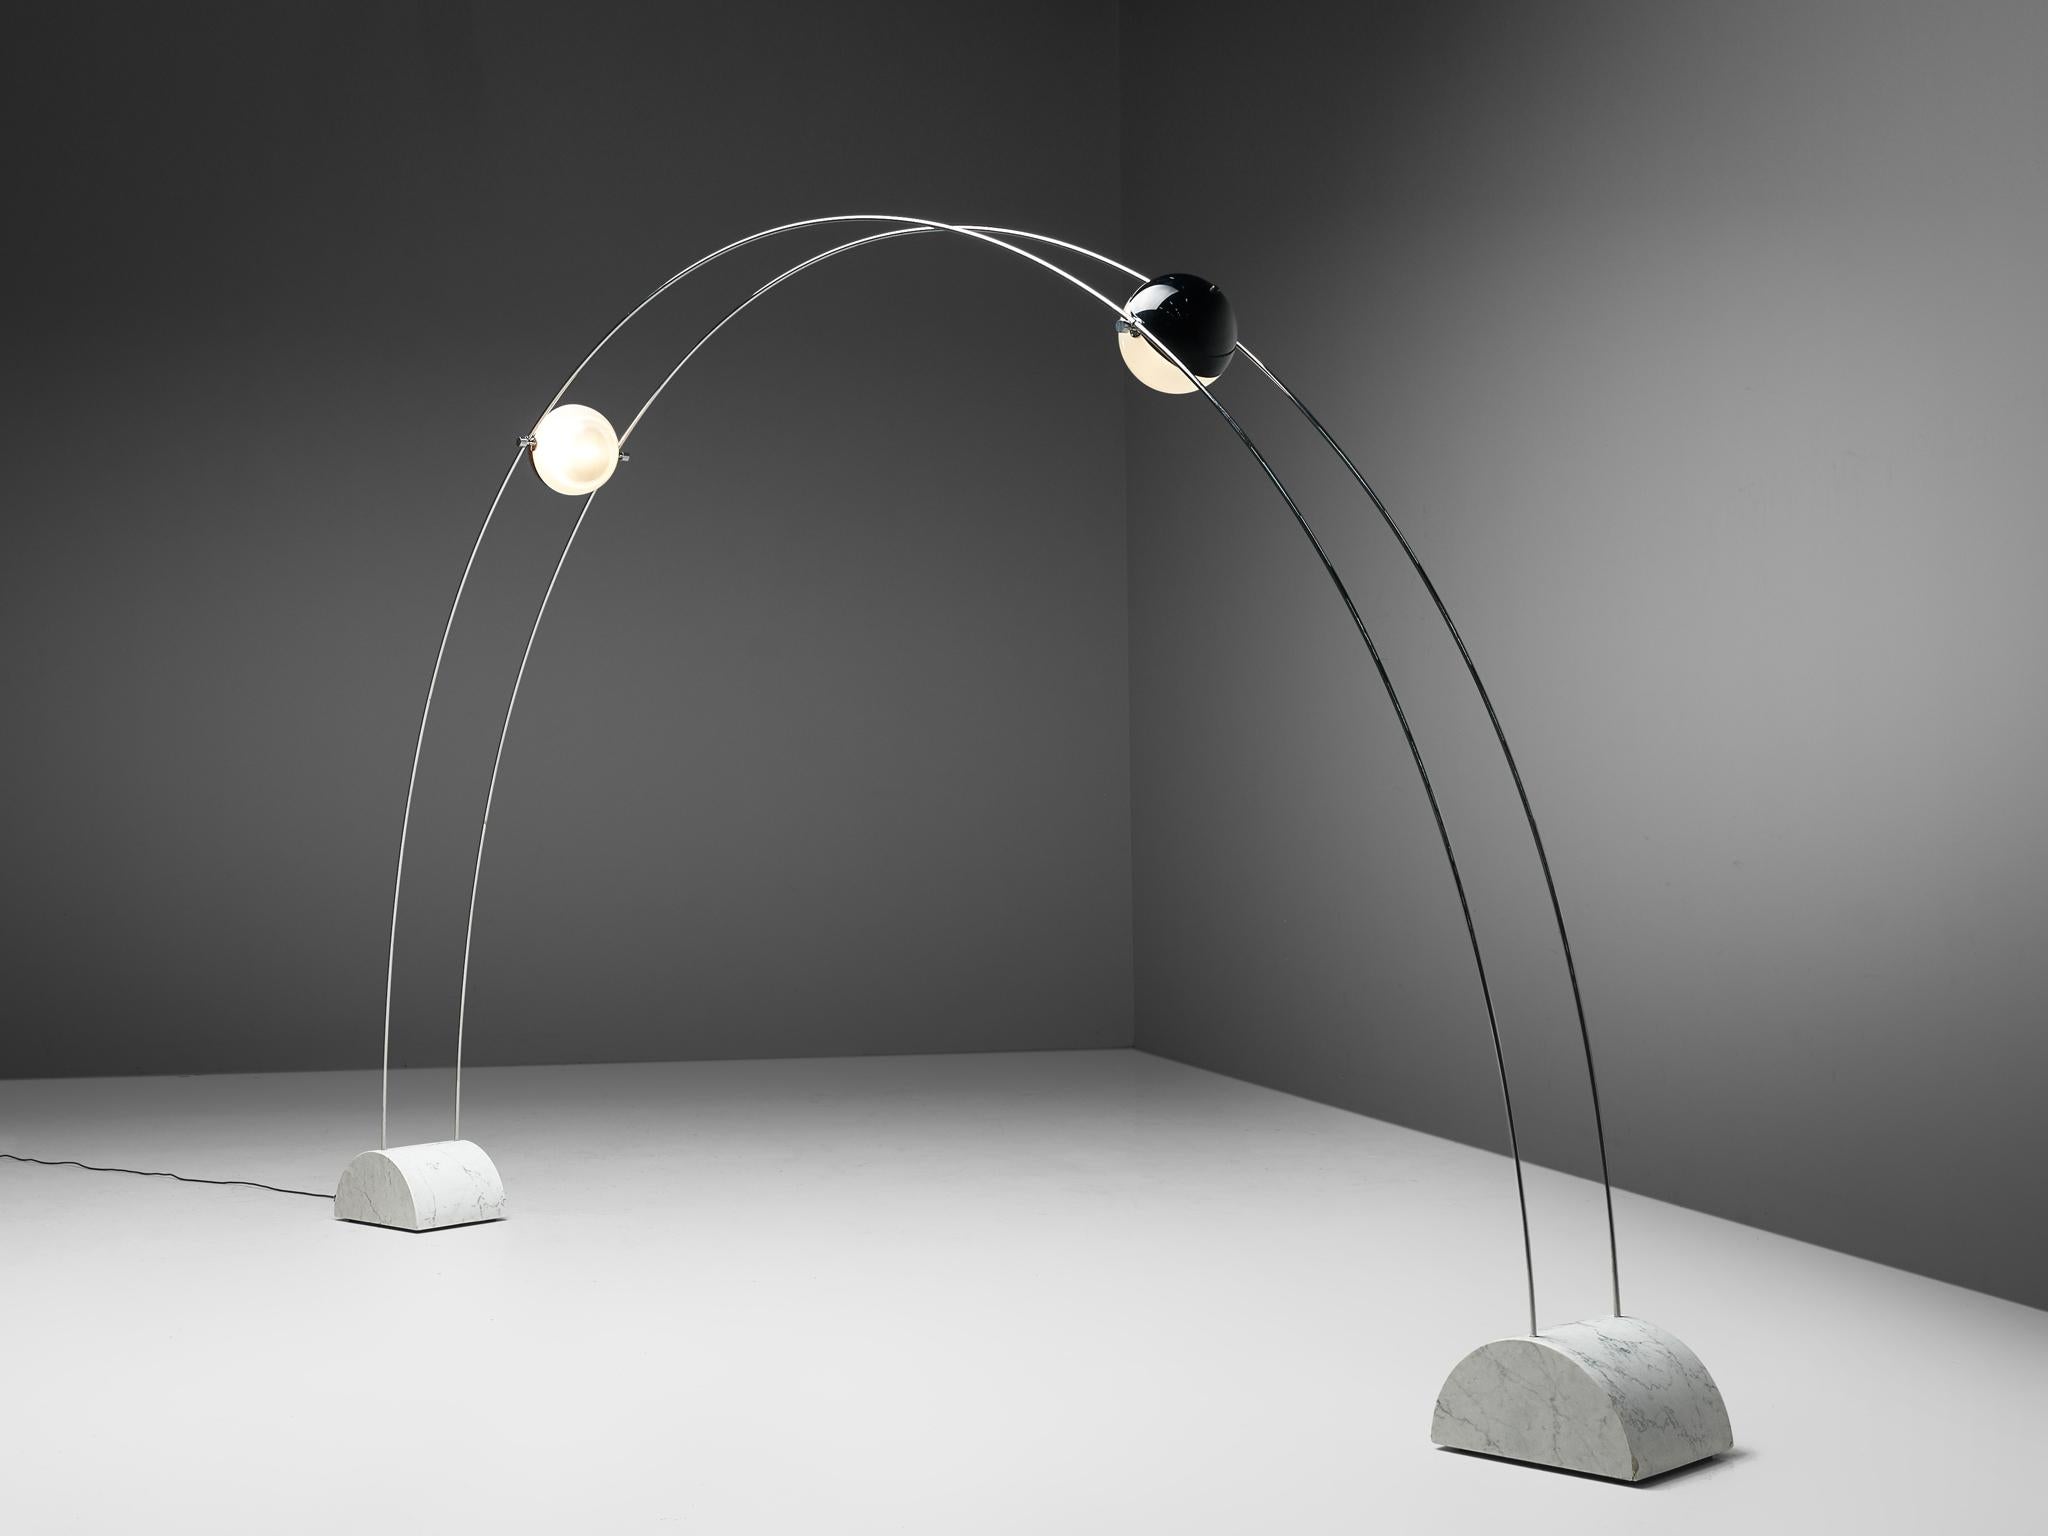 Large 'Ponte' floor lamp designed by Arditi group for Sormani, Italy, 1970s.

Lighting sculpture equipped with two adjustable lights connected on two steel tracks. This large arch shaped floor lamp supported by two rounded white marble bases. 

